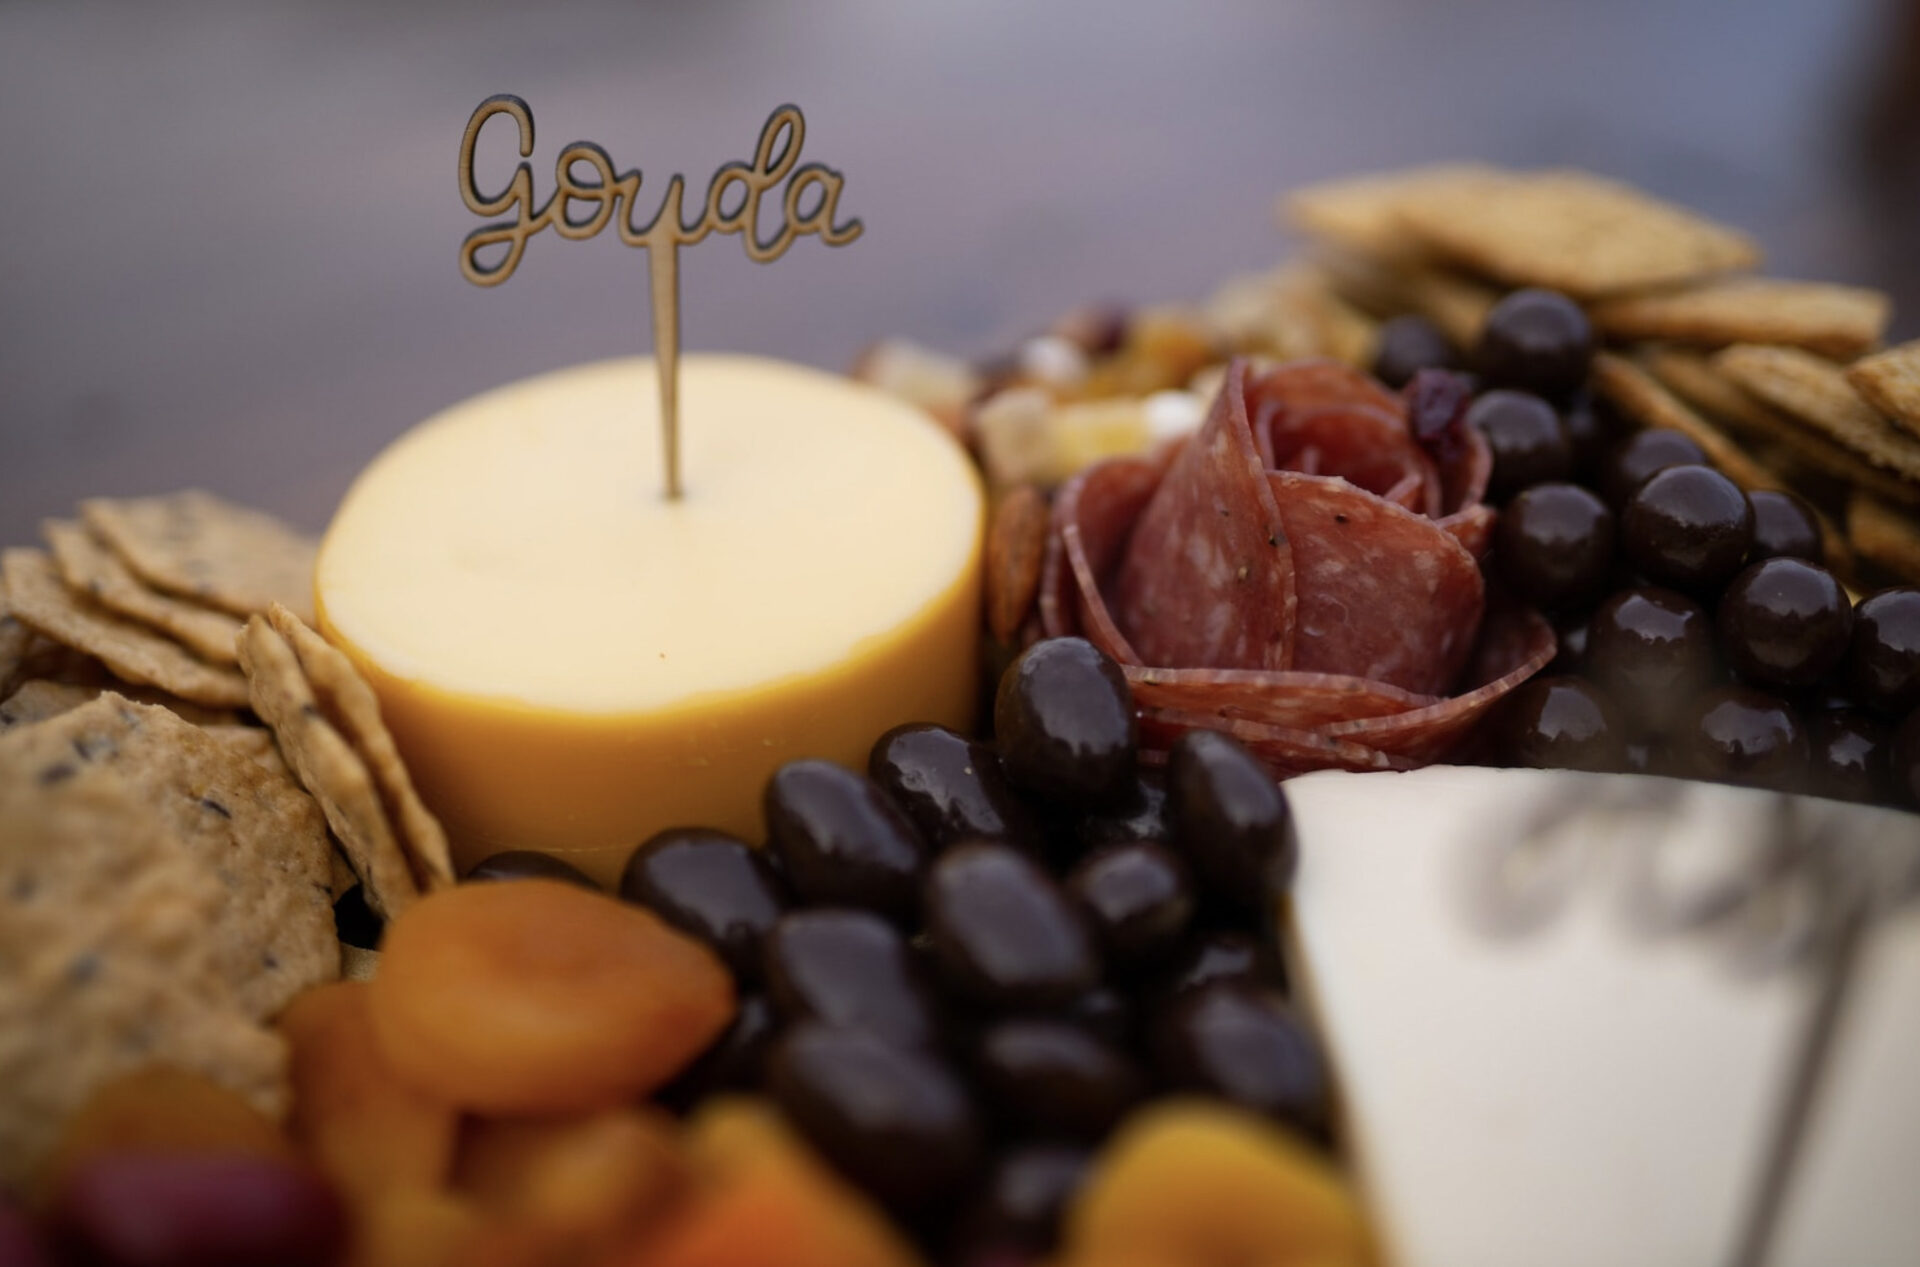 A charcuterie board with meats and gouda is marked with a small sign